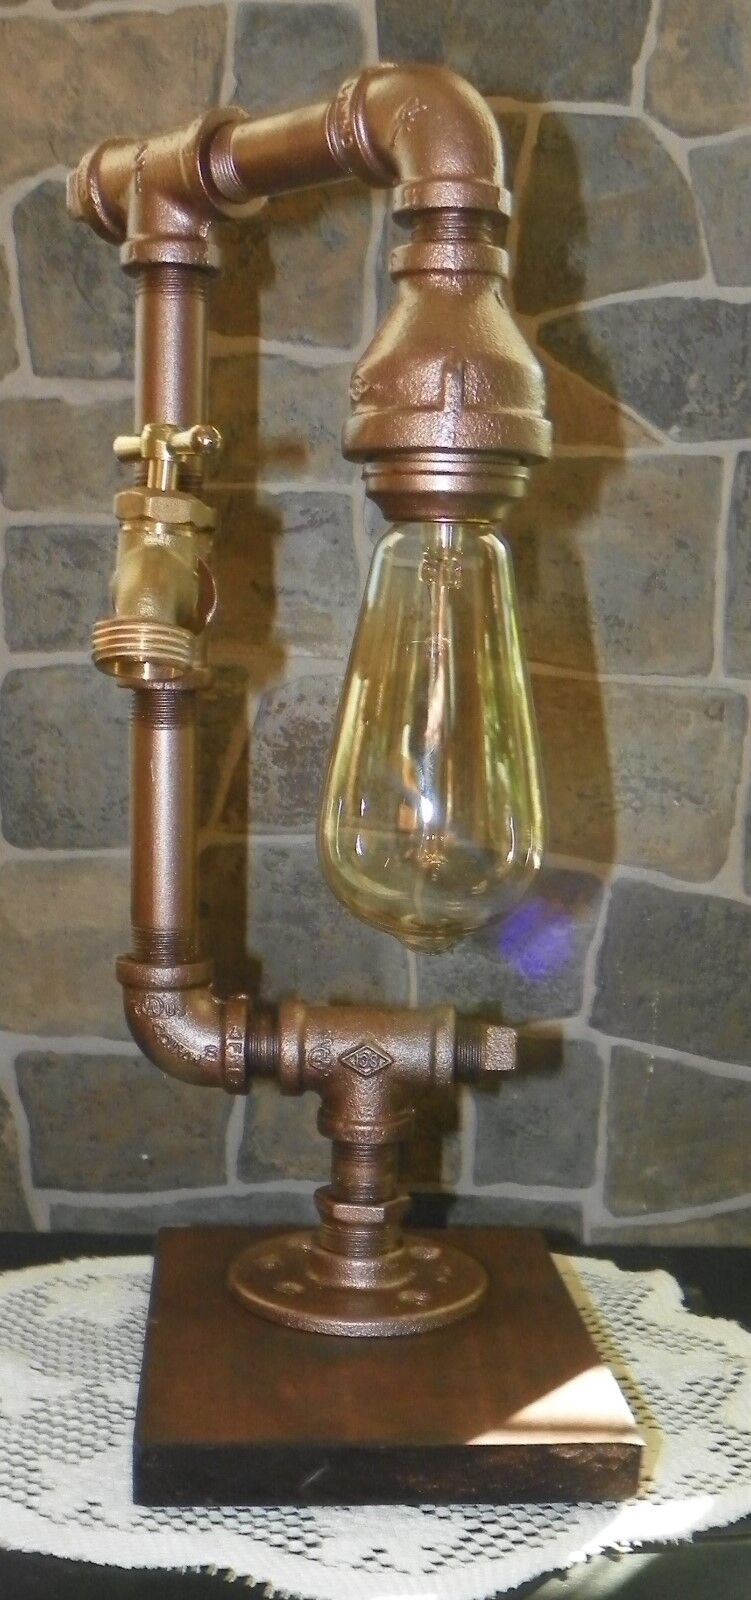 Retro Industrial Vintage Steampunk style Lamp with Water Spigot